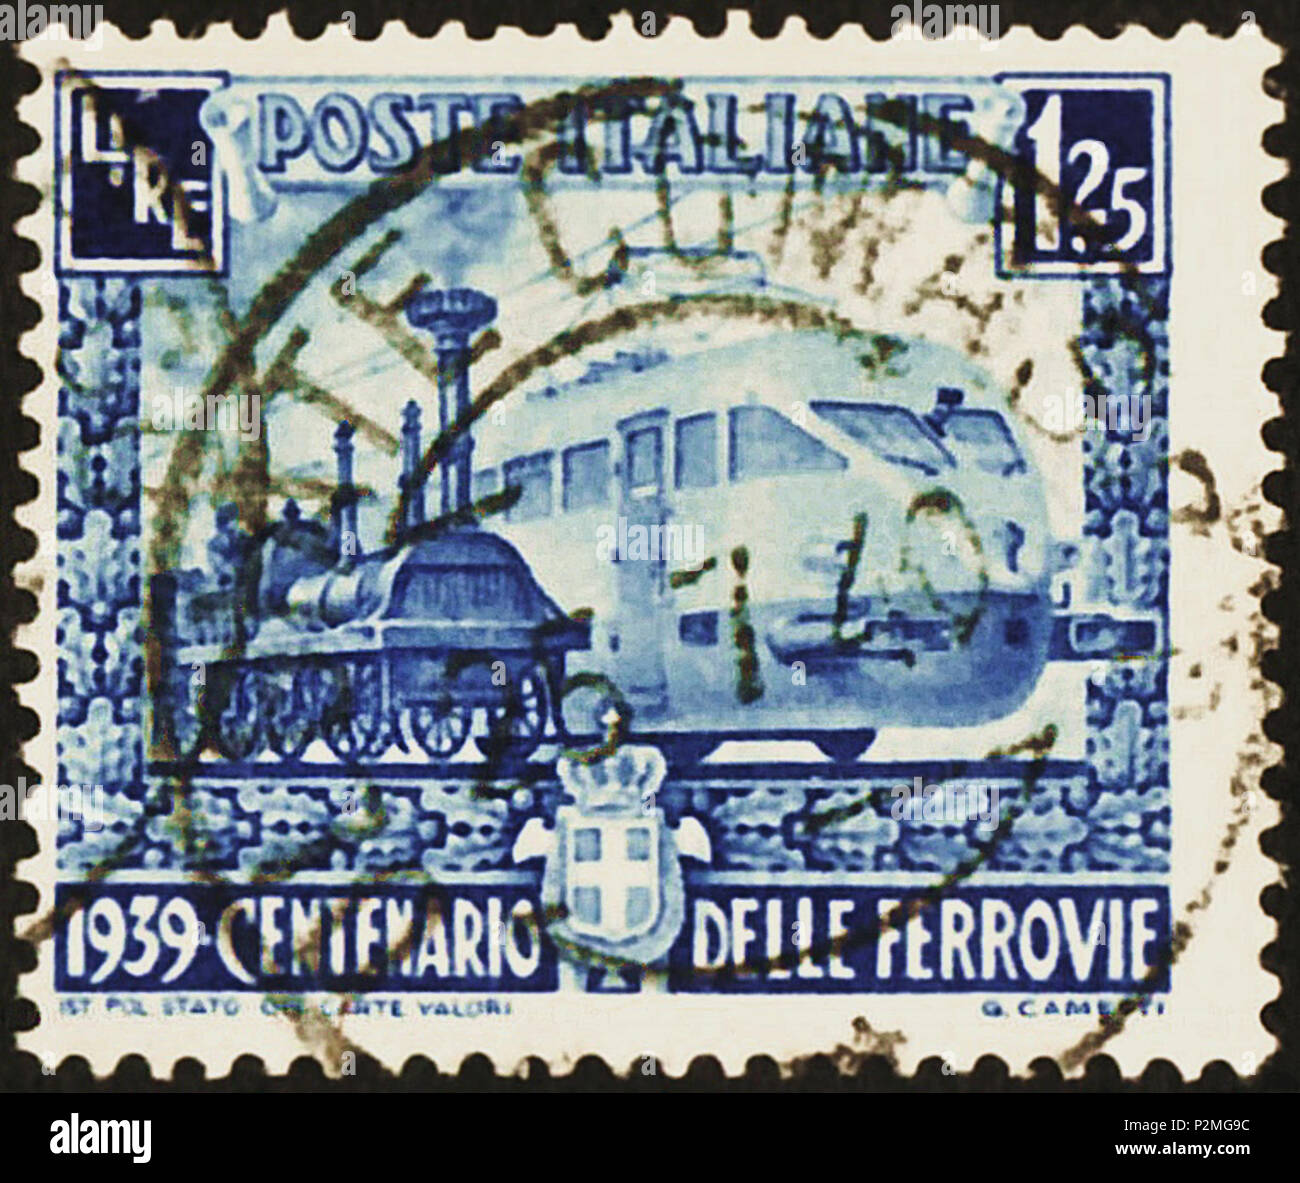 English Stamp Of The Kingdom Of Italy 1939 Commemorative Stamp Of The Issue Centenario Delle Ferrovie Italiane Italian For 100th Anniversary Of Italian Railways 15 December 1939 Stamp With The